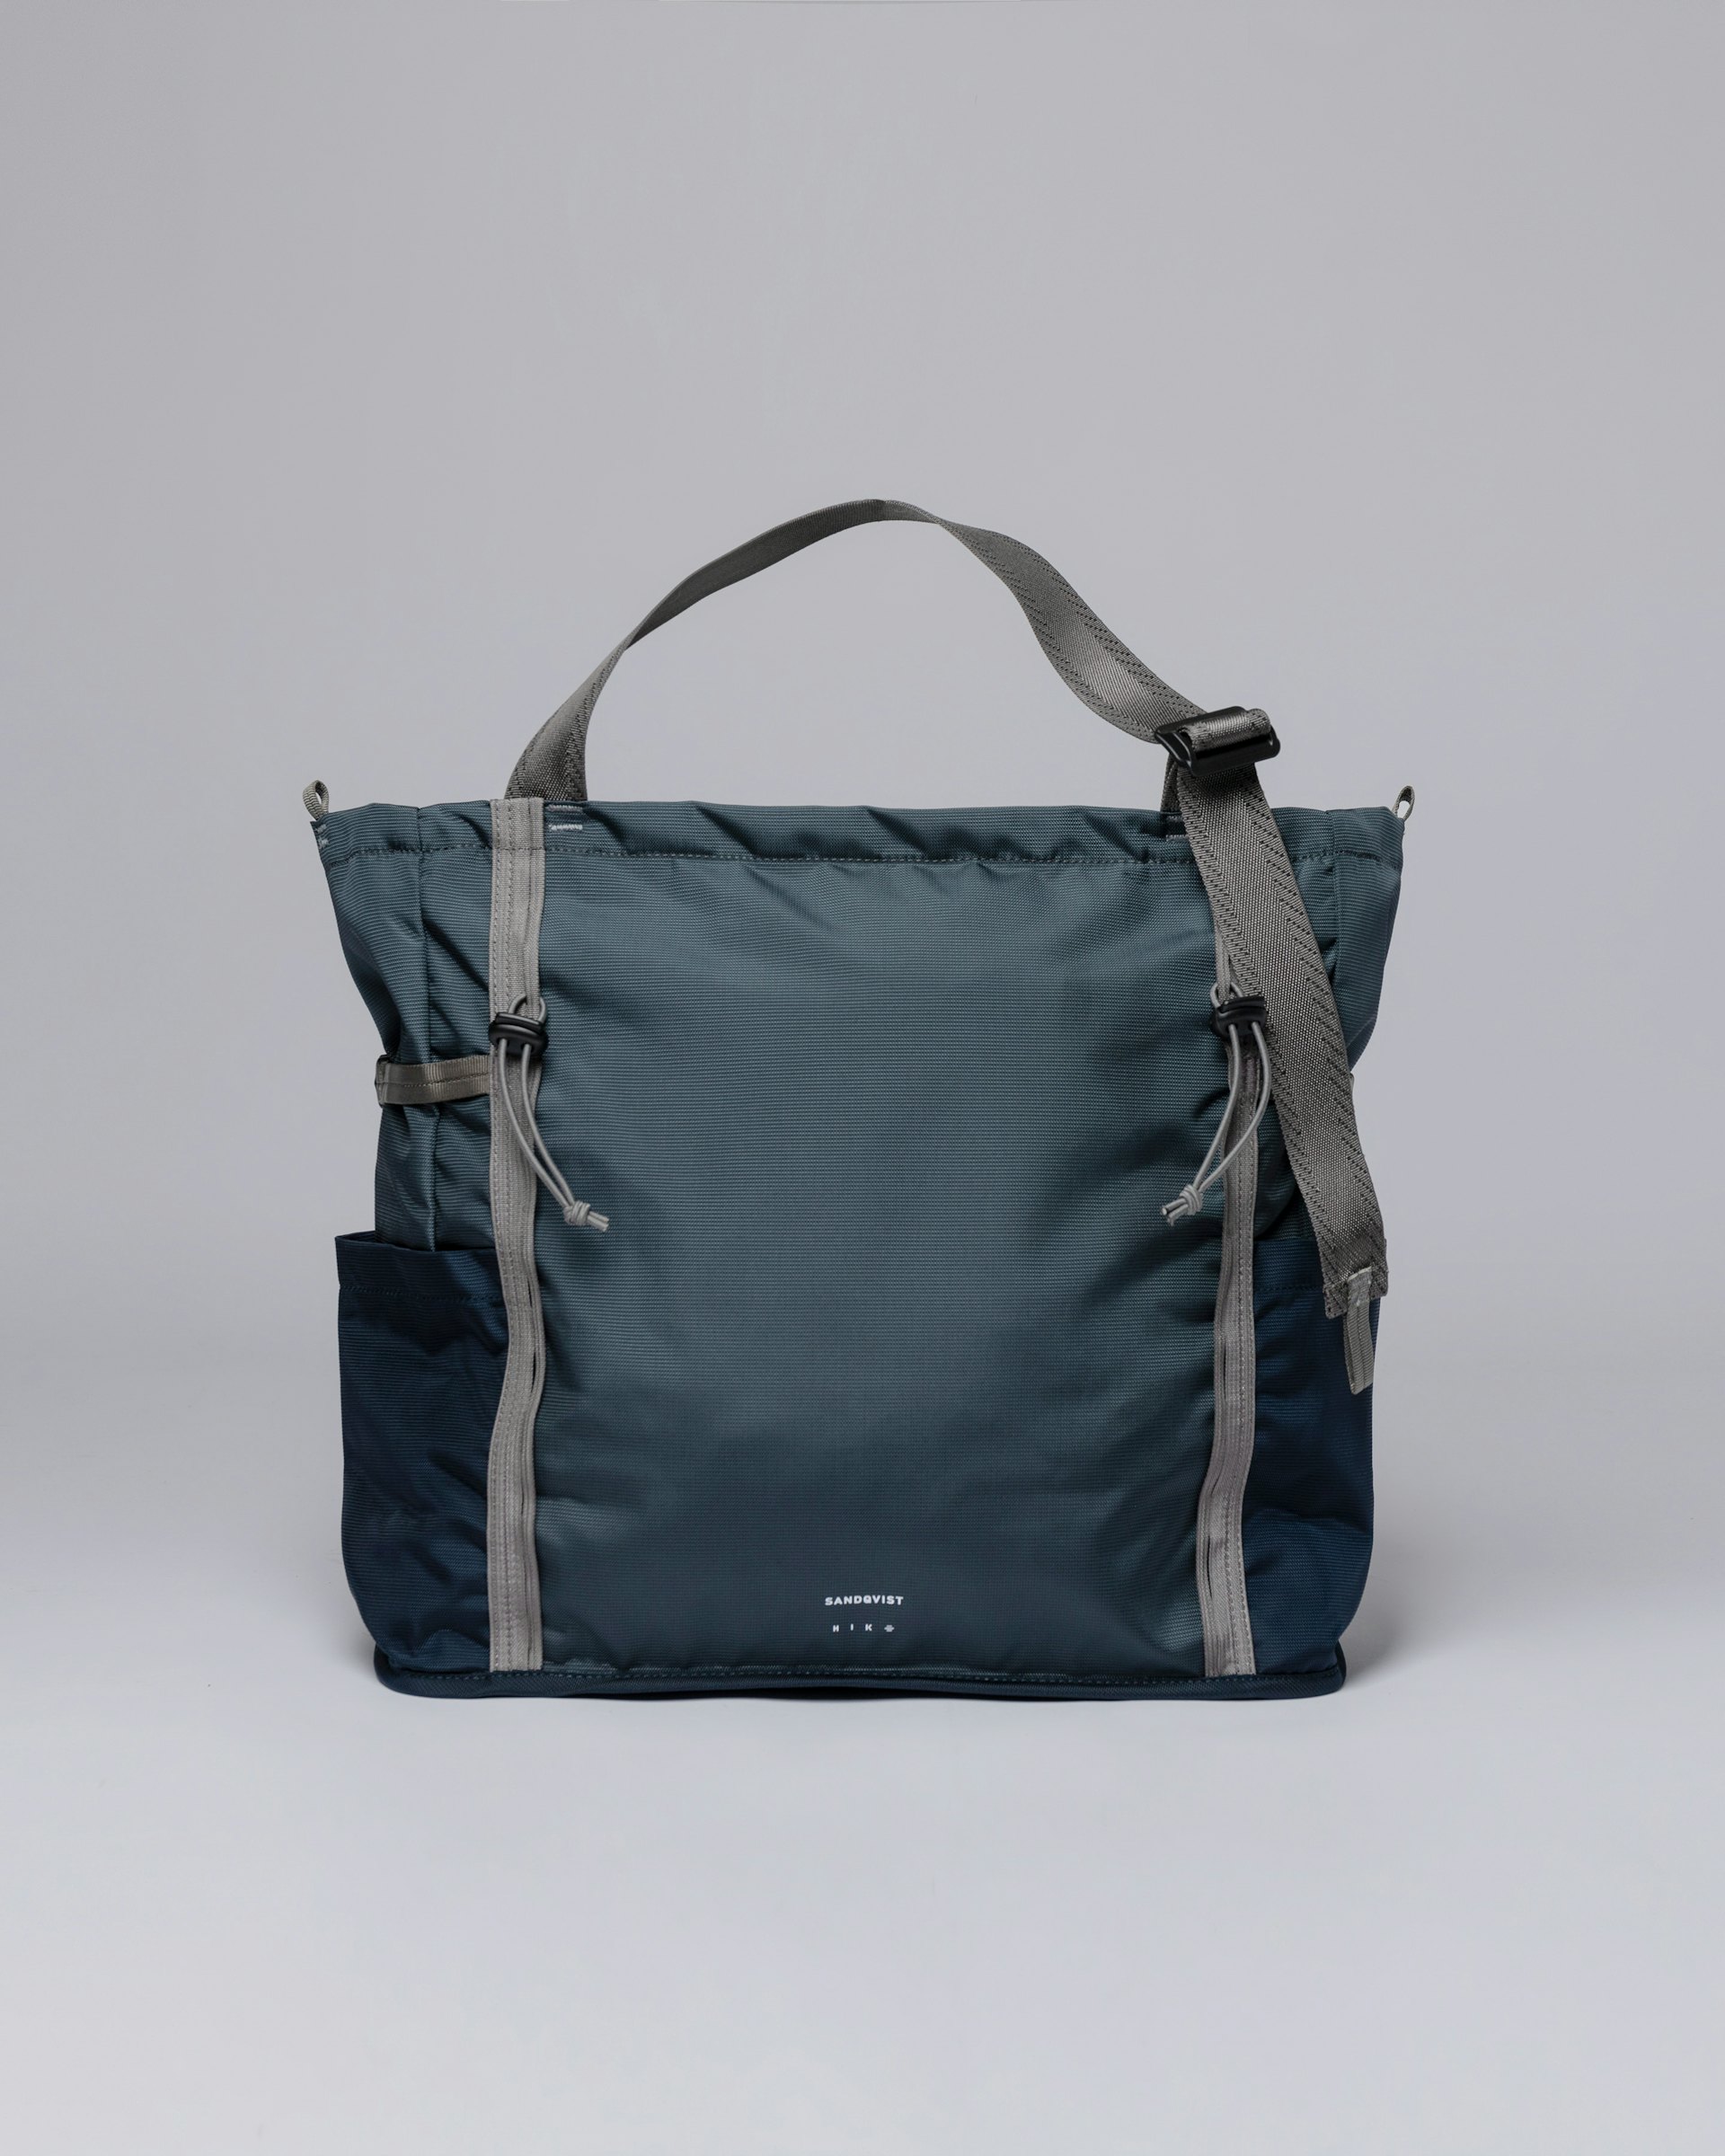 River Hike belongs to the category Tote bags and is in color steel blue